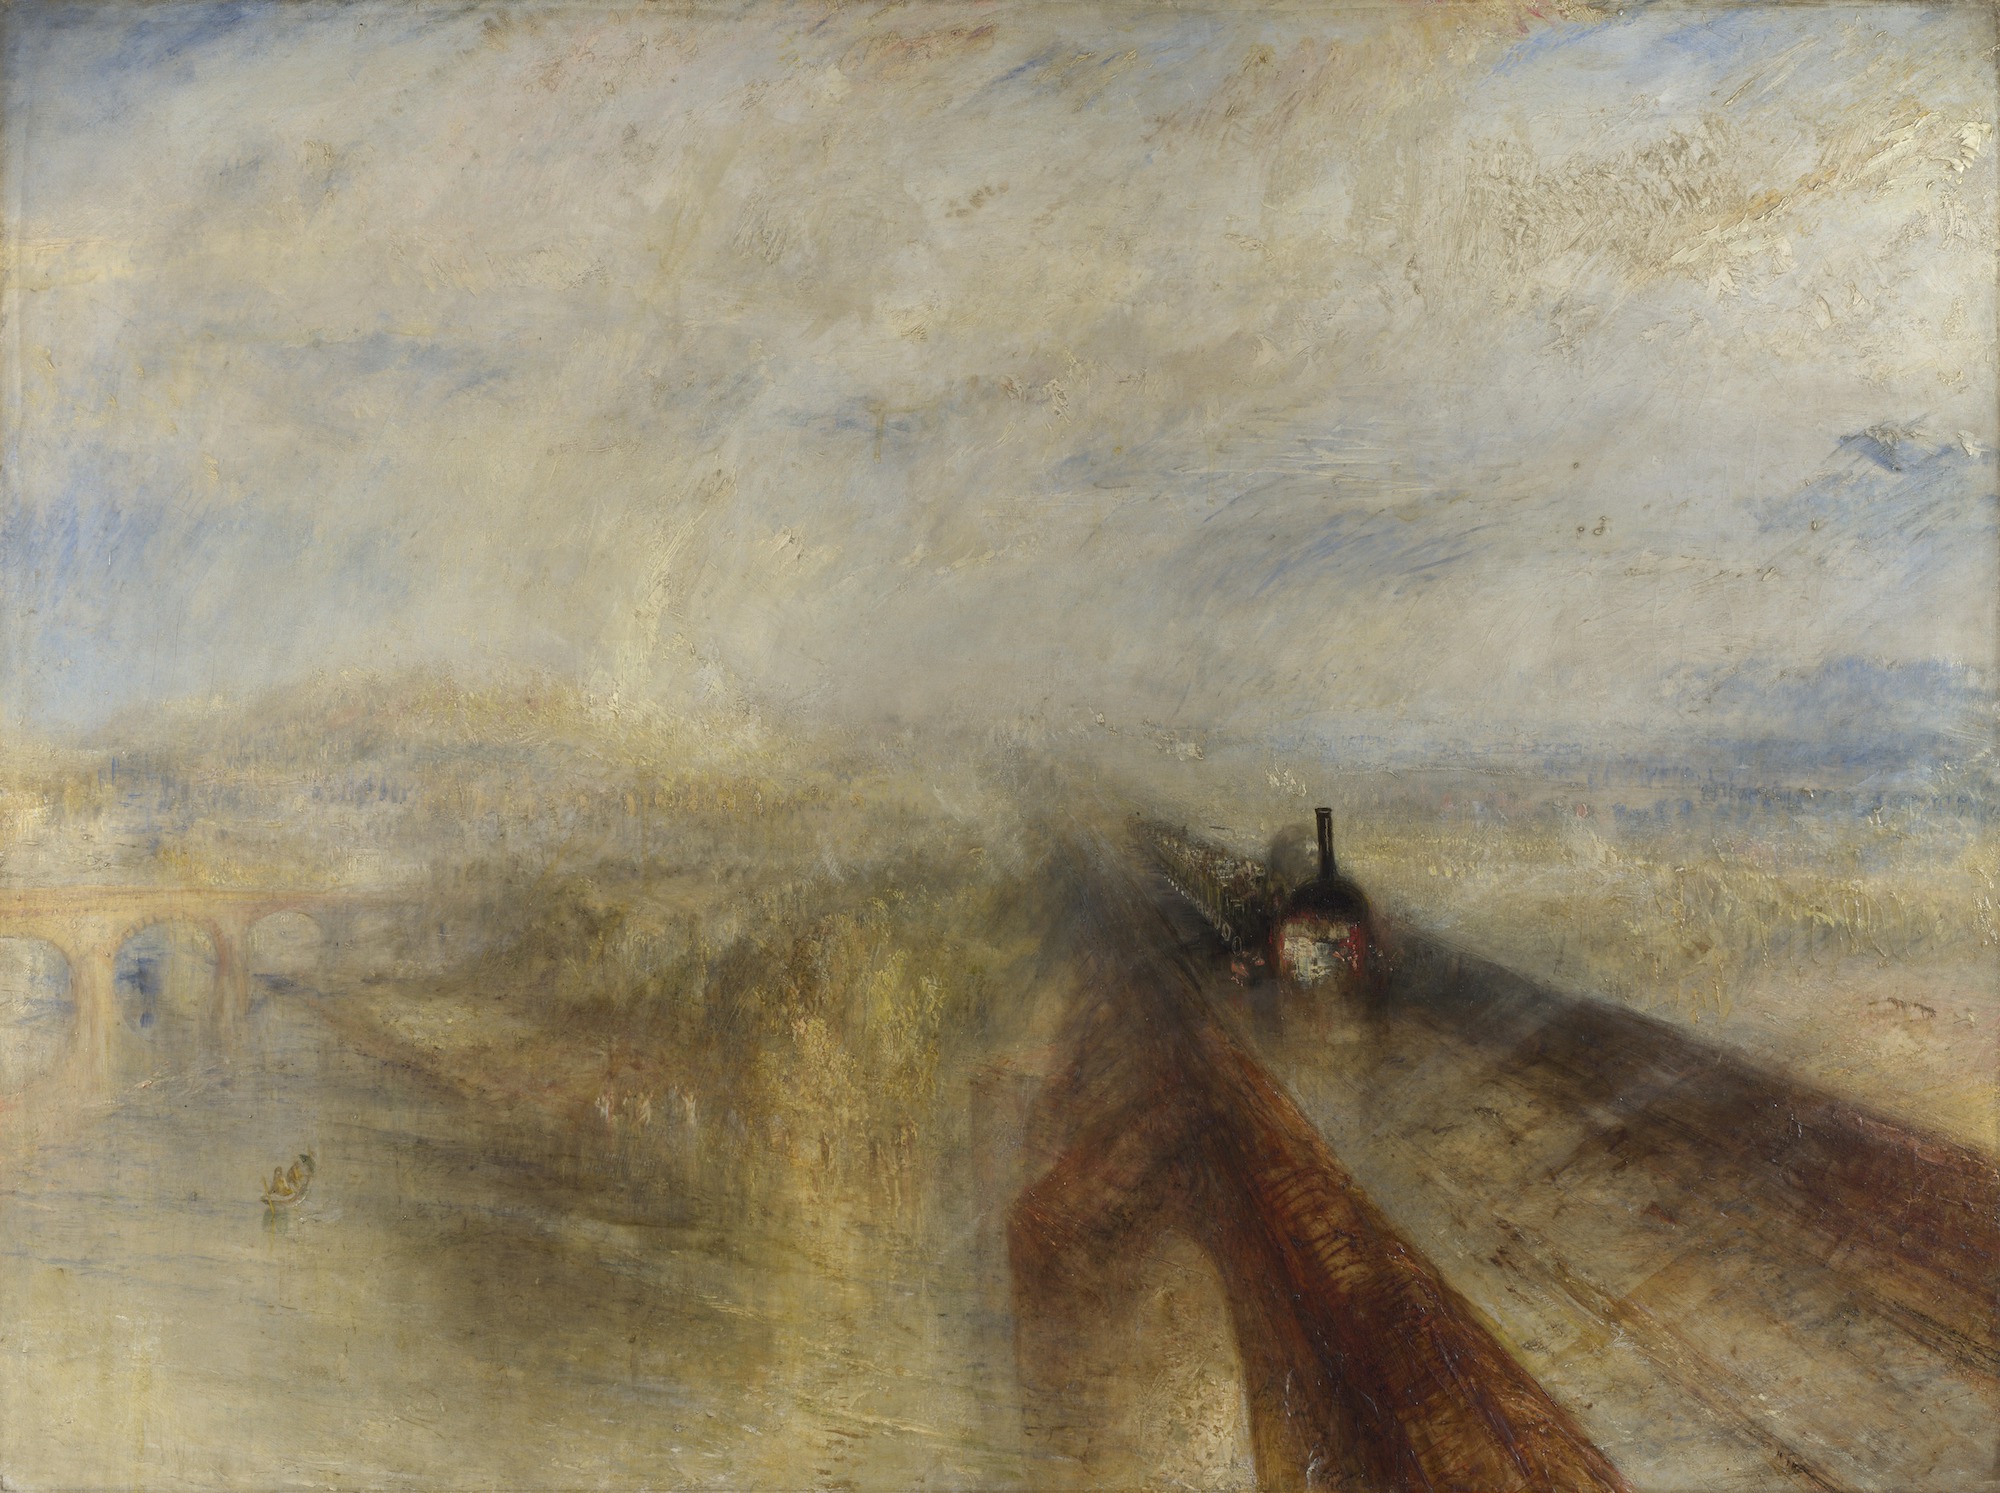 Rain, Steam and Speed – The Great Western Railway by Joseph Mallord William Turner - 1844 - 91 x 122 cm National Gallery